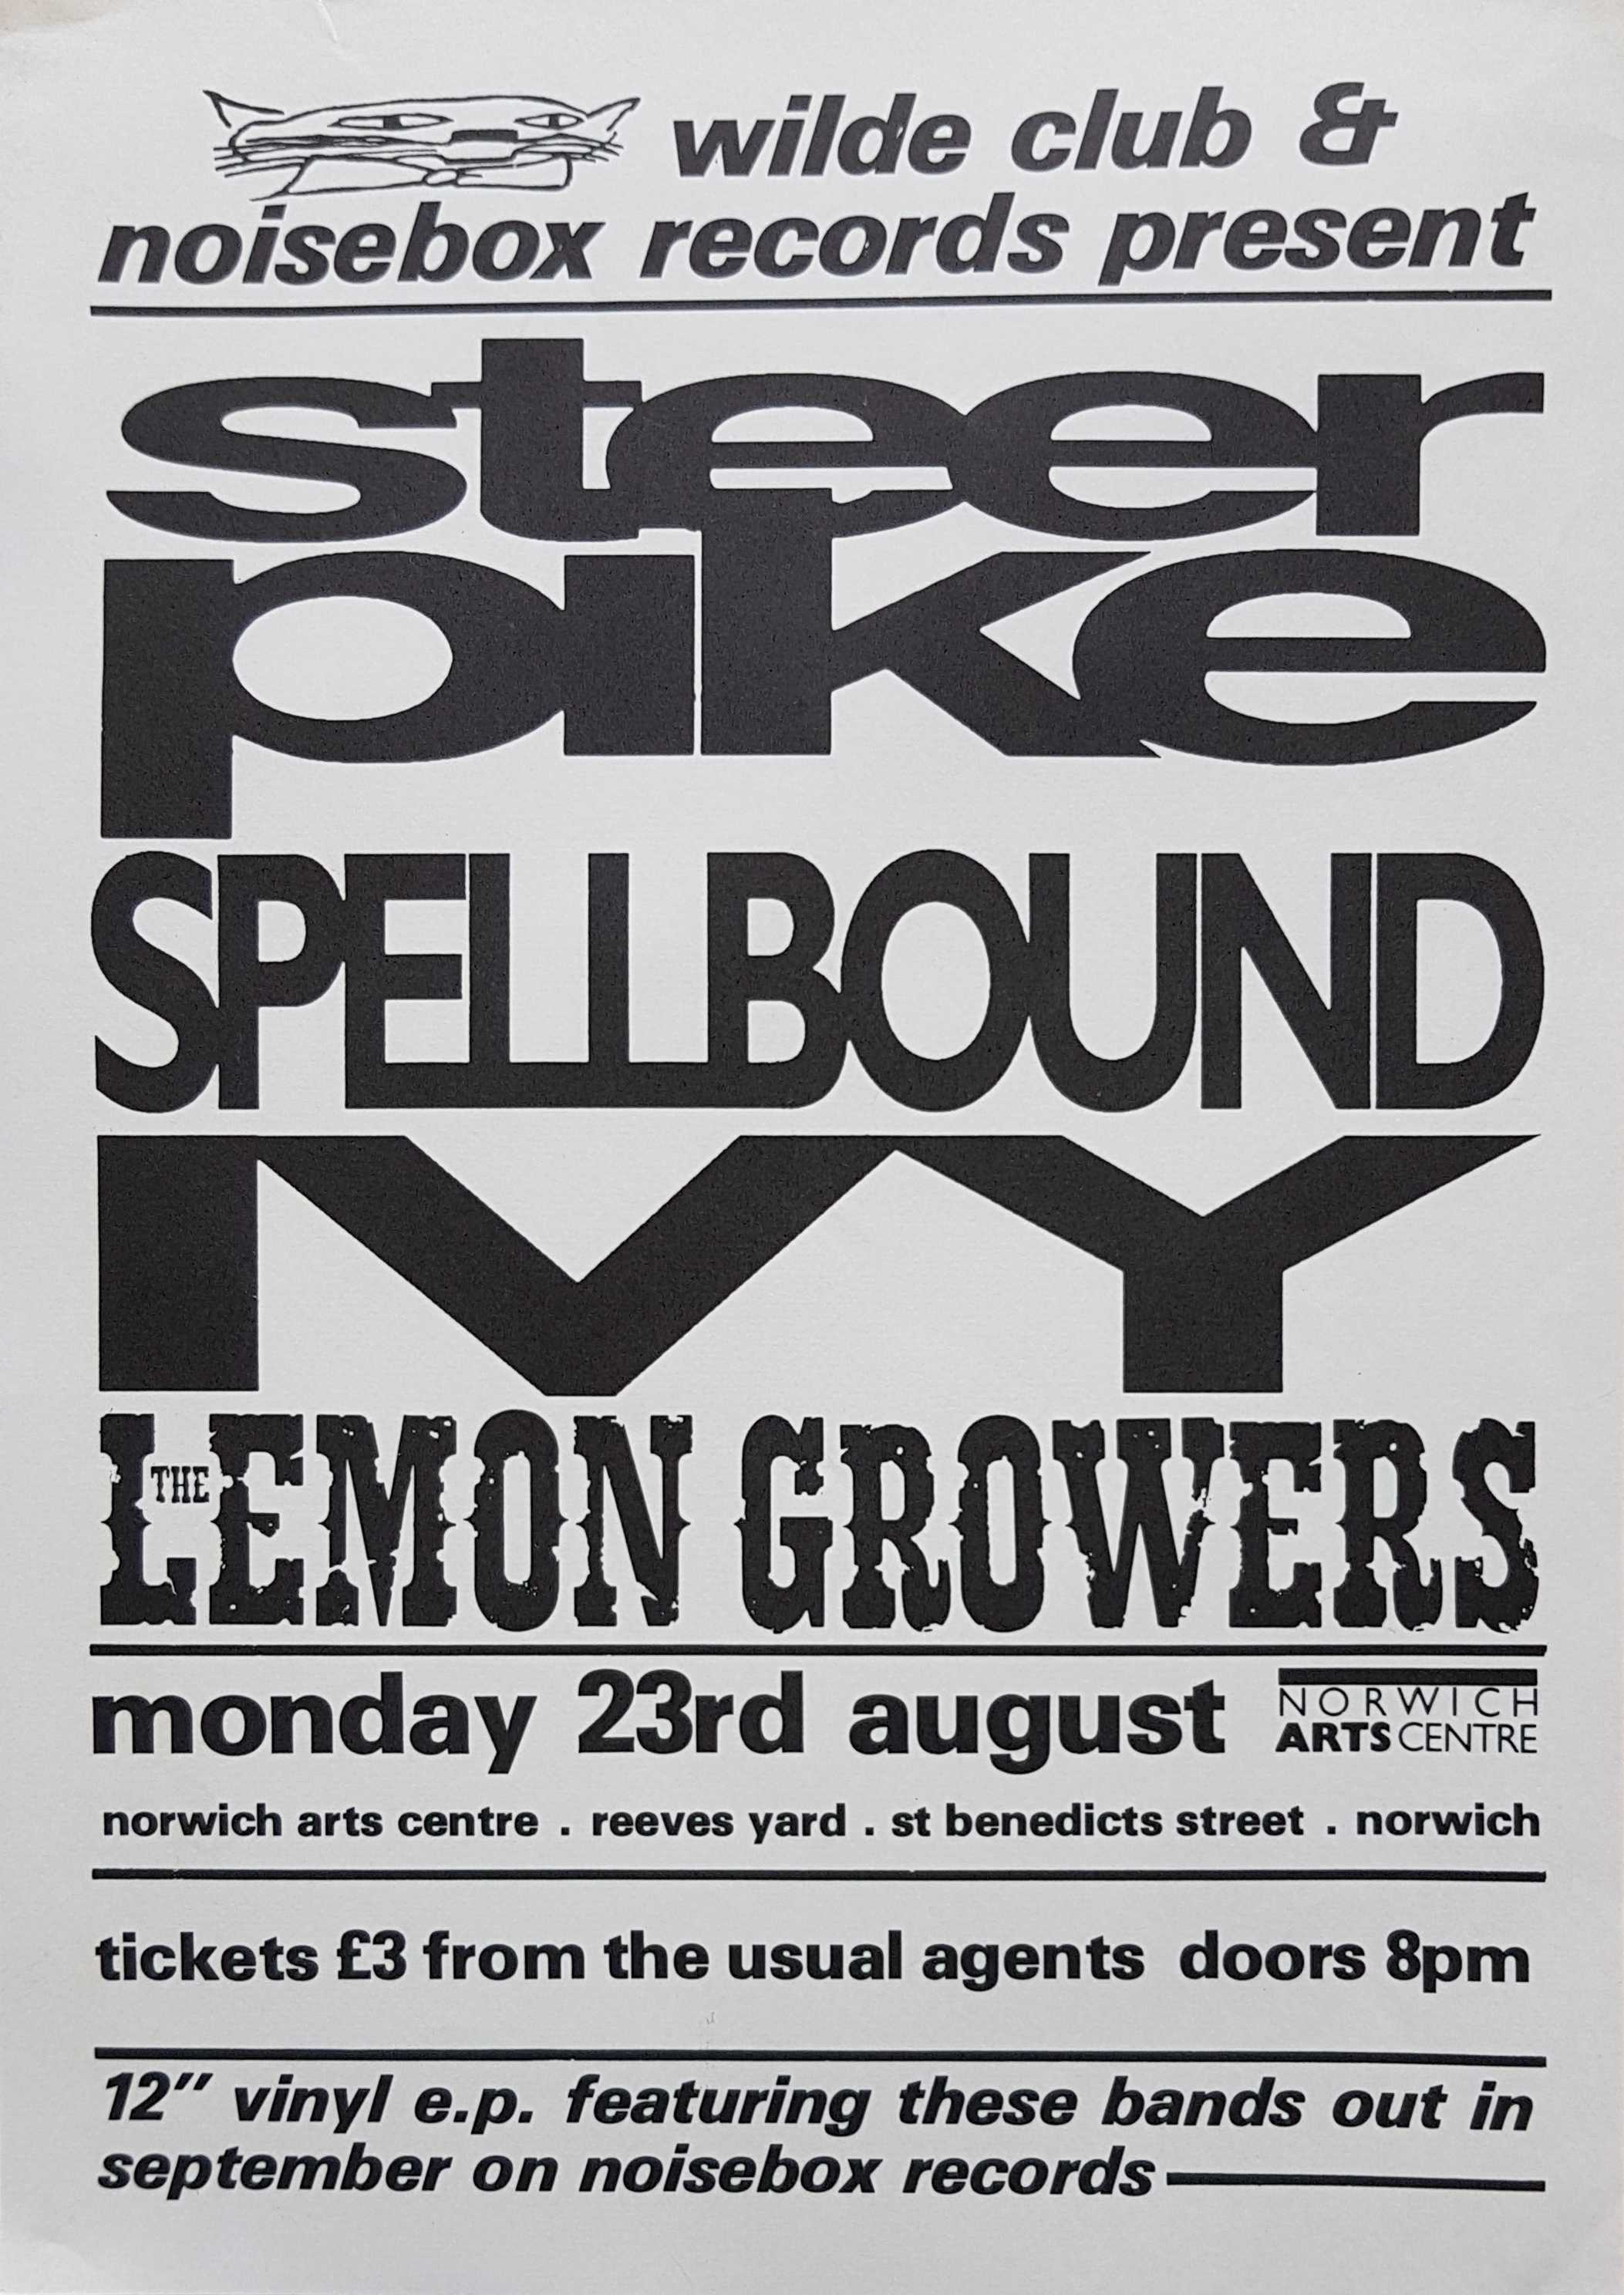 Picture of Poster-TLG-NACM Norwich Arts Centre - Medium (With Steer Pike / Spellbound / Ivy) by artist The Lemon Growers